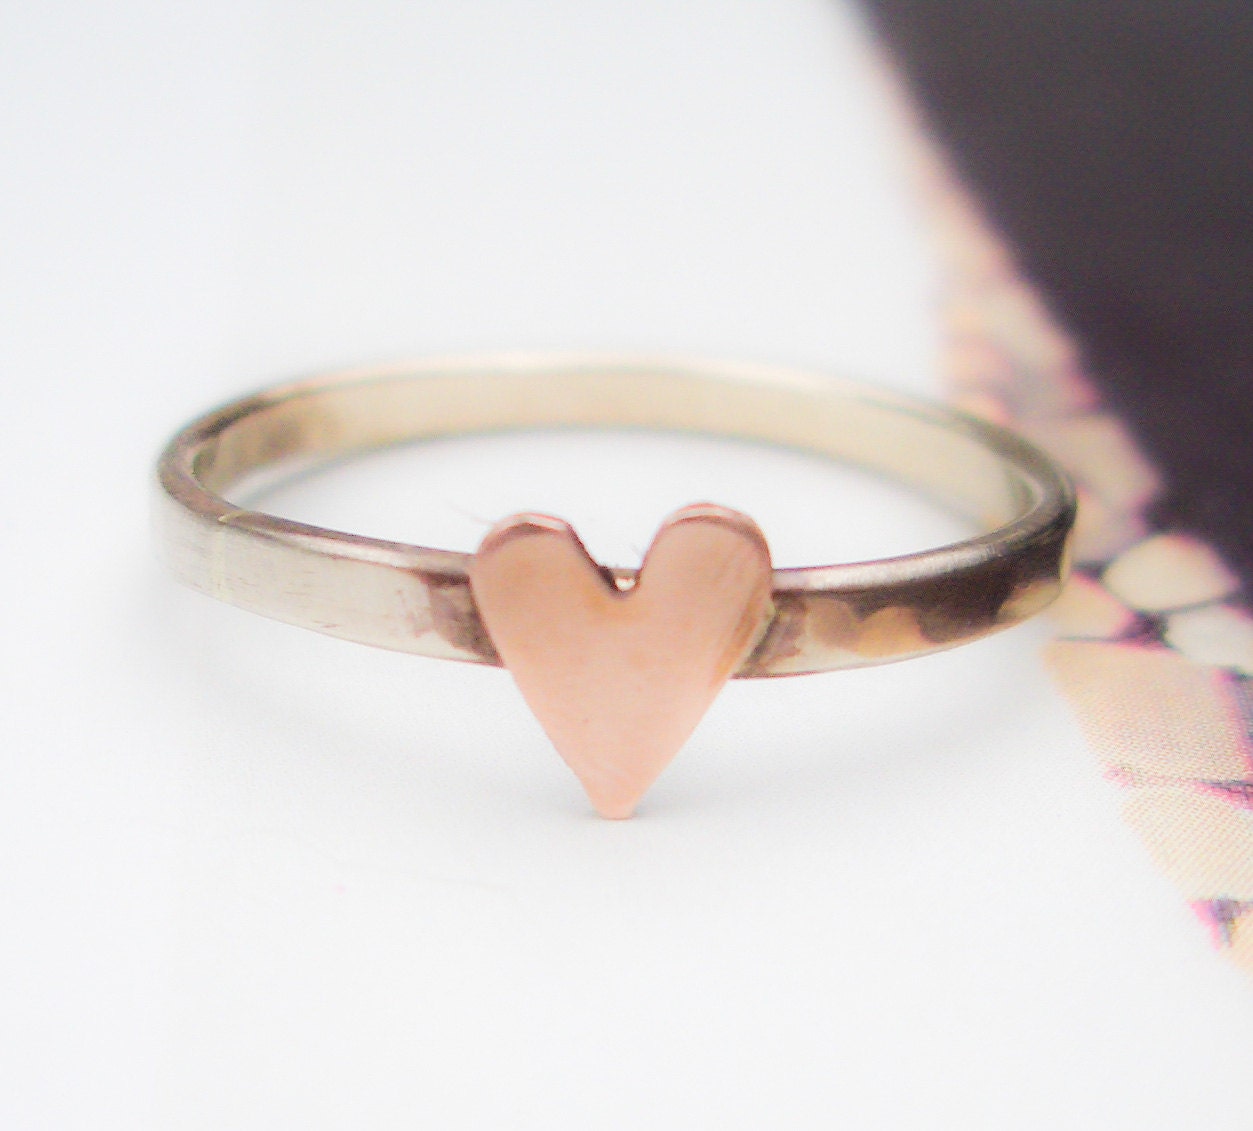 Pink Heart Ring, Large Heart Shaped Crystal Ring, Wedding Ring, Cocktail Ring, Statement Rings, Promise Ring, Heart Stone Ring, Gift, GR73